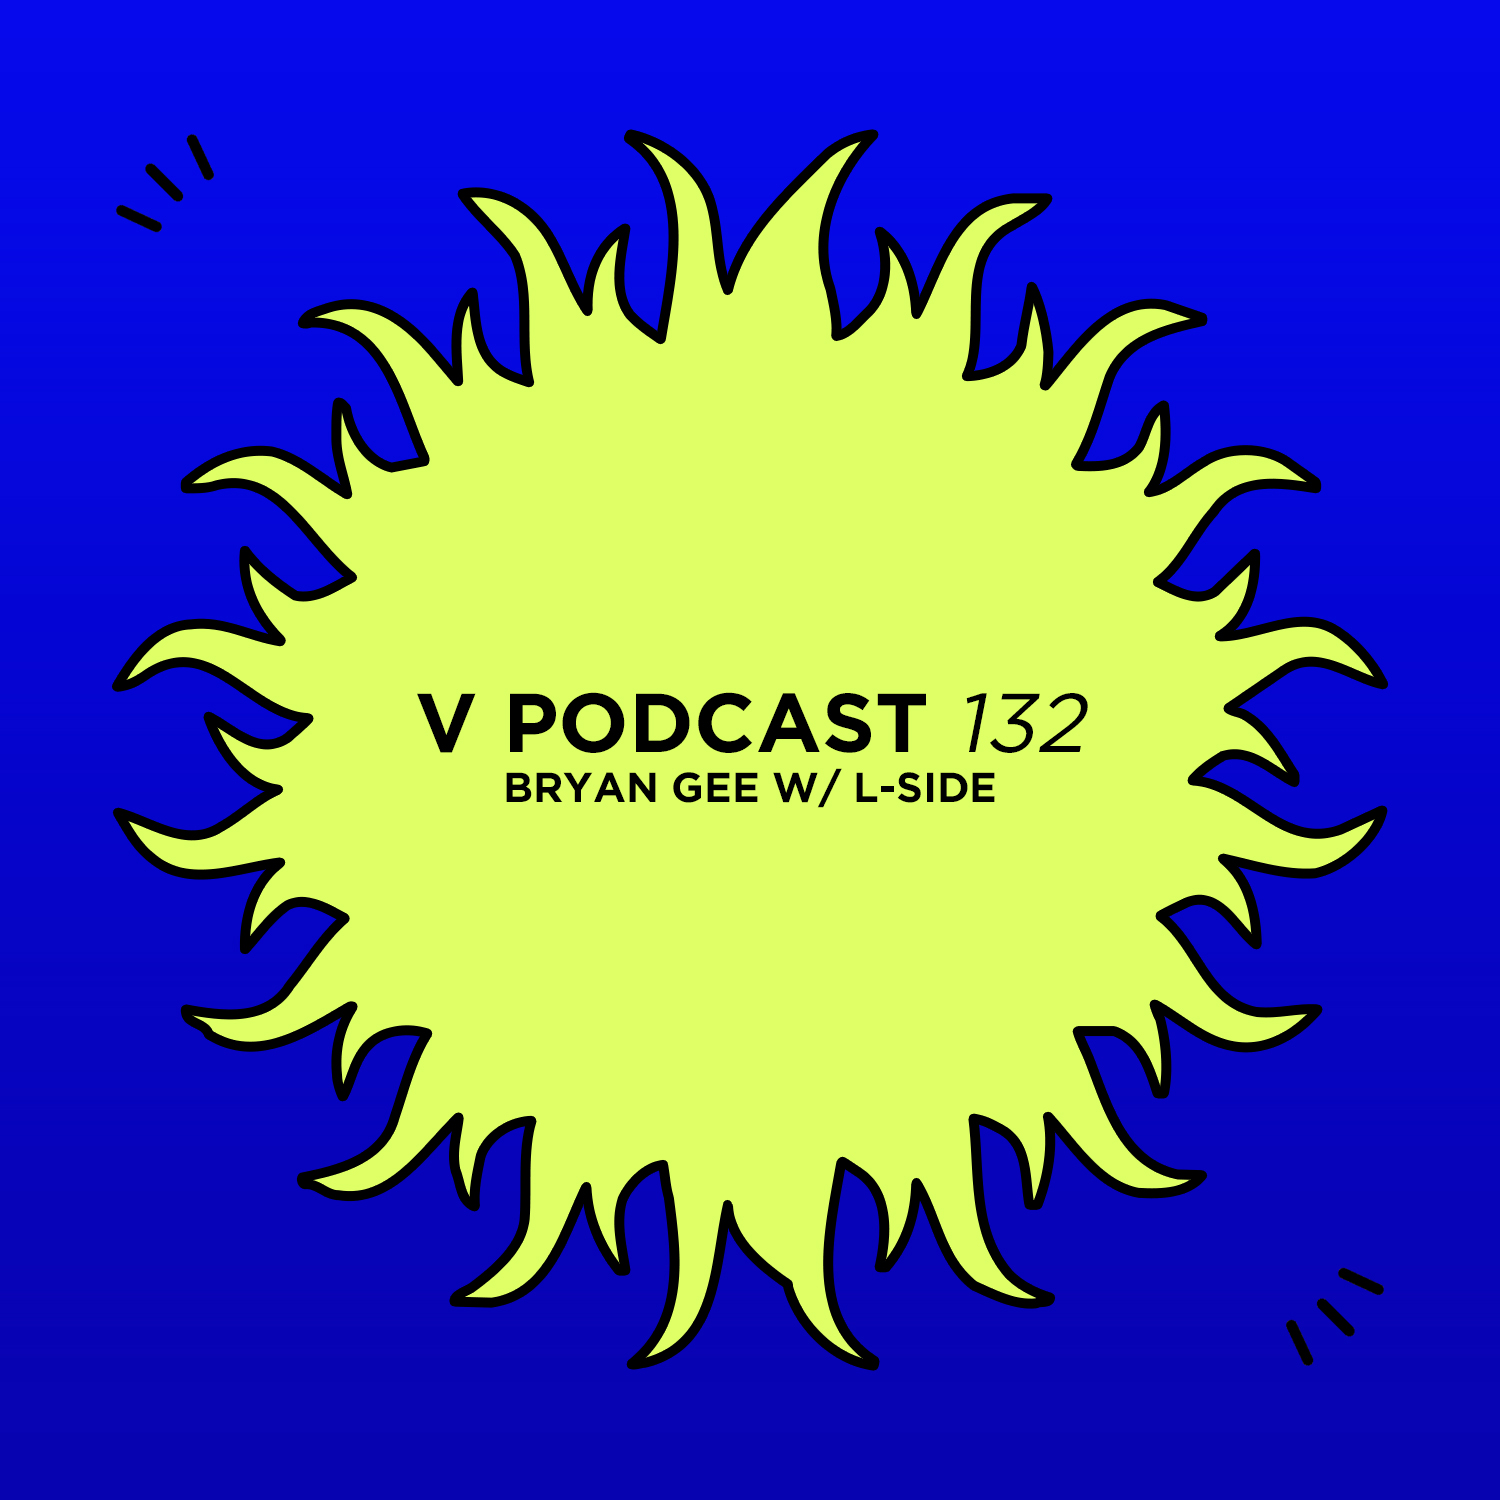 V Podcast 132 - Hosted by Bryan Gee w/ L-Side Artwork